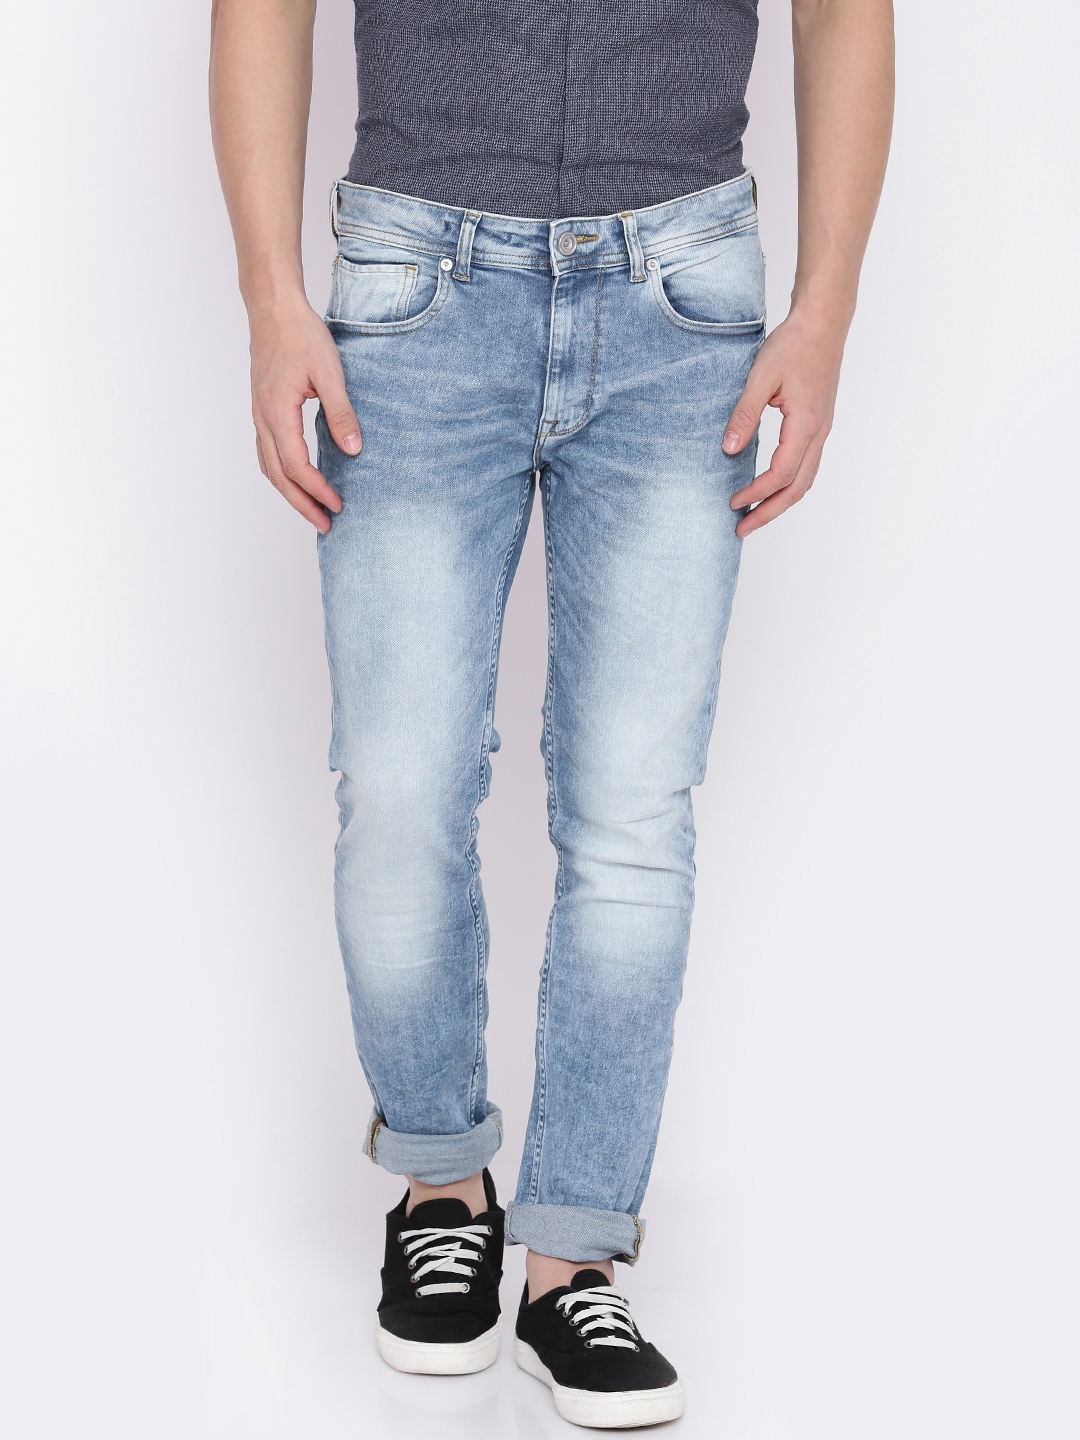 Buy Voi Jeans Men Blue Skinny Fit Mid Rise Clean Look Stretchable Jeans ...